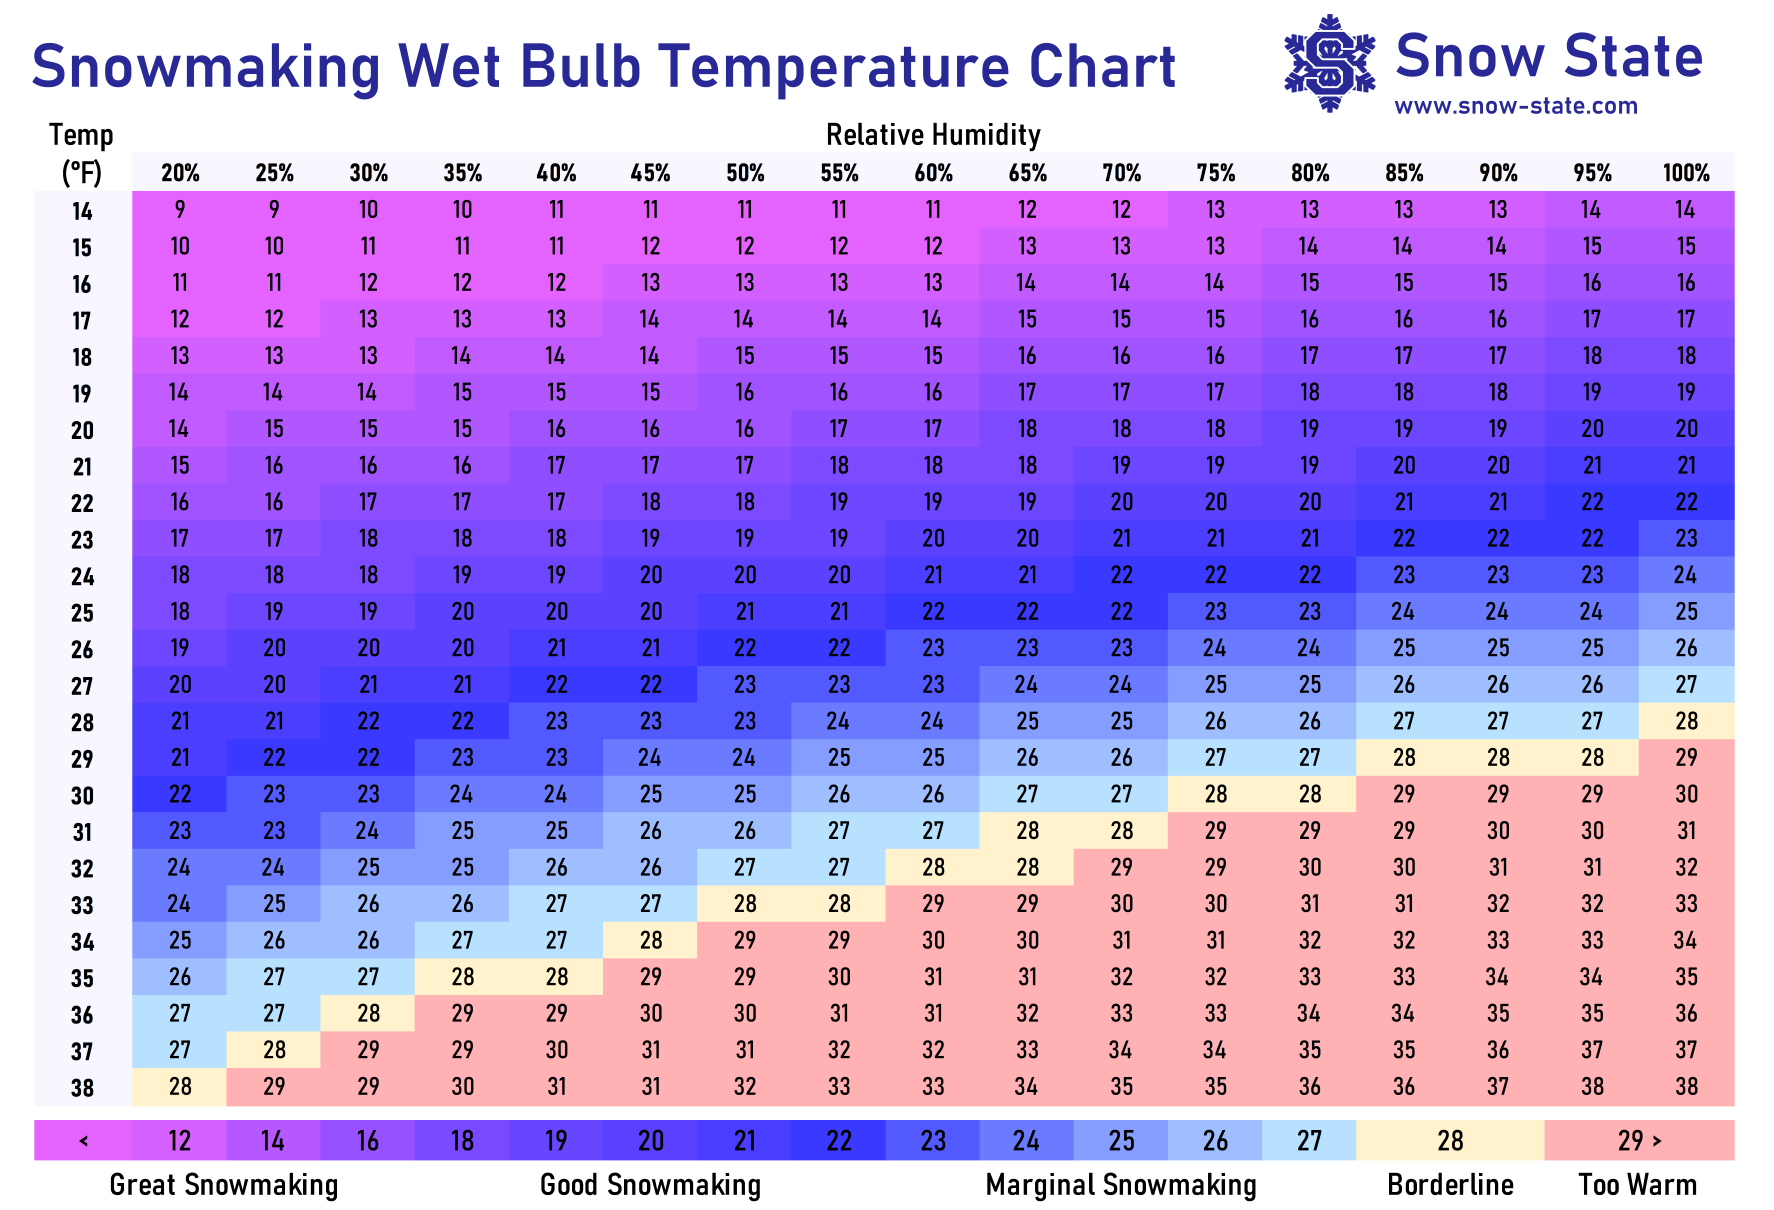 Wet bulb temperature chart from Snow State.